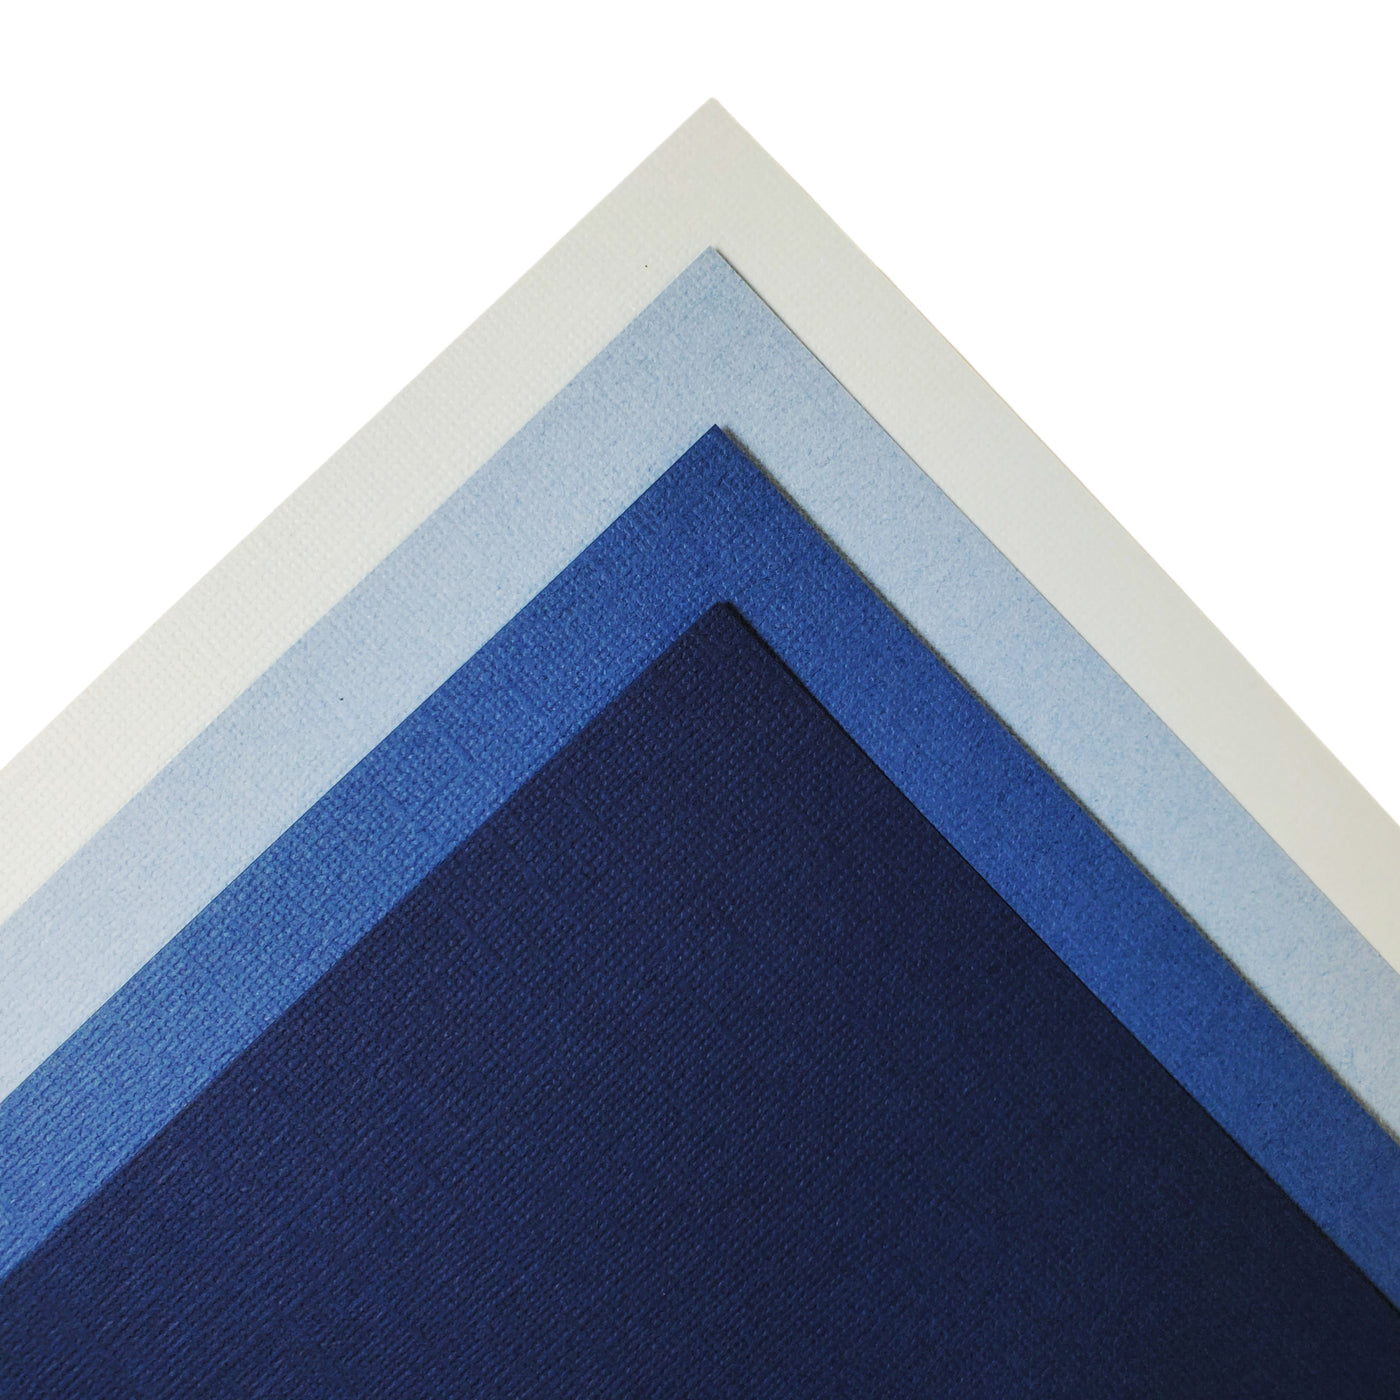 The Navy monochromatic assortment includes three (3) each of four (4) shades of blue colors of Bazzill textured cardstock.